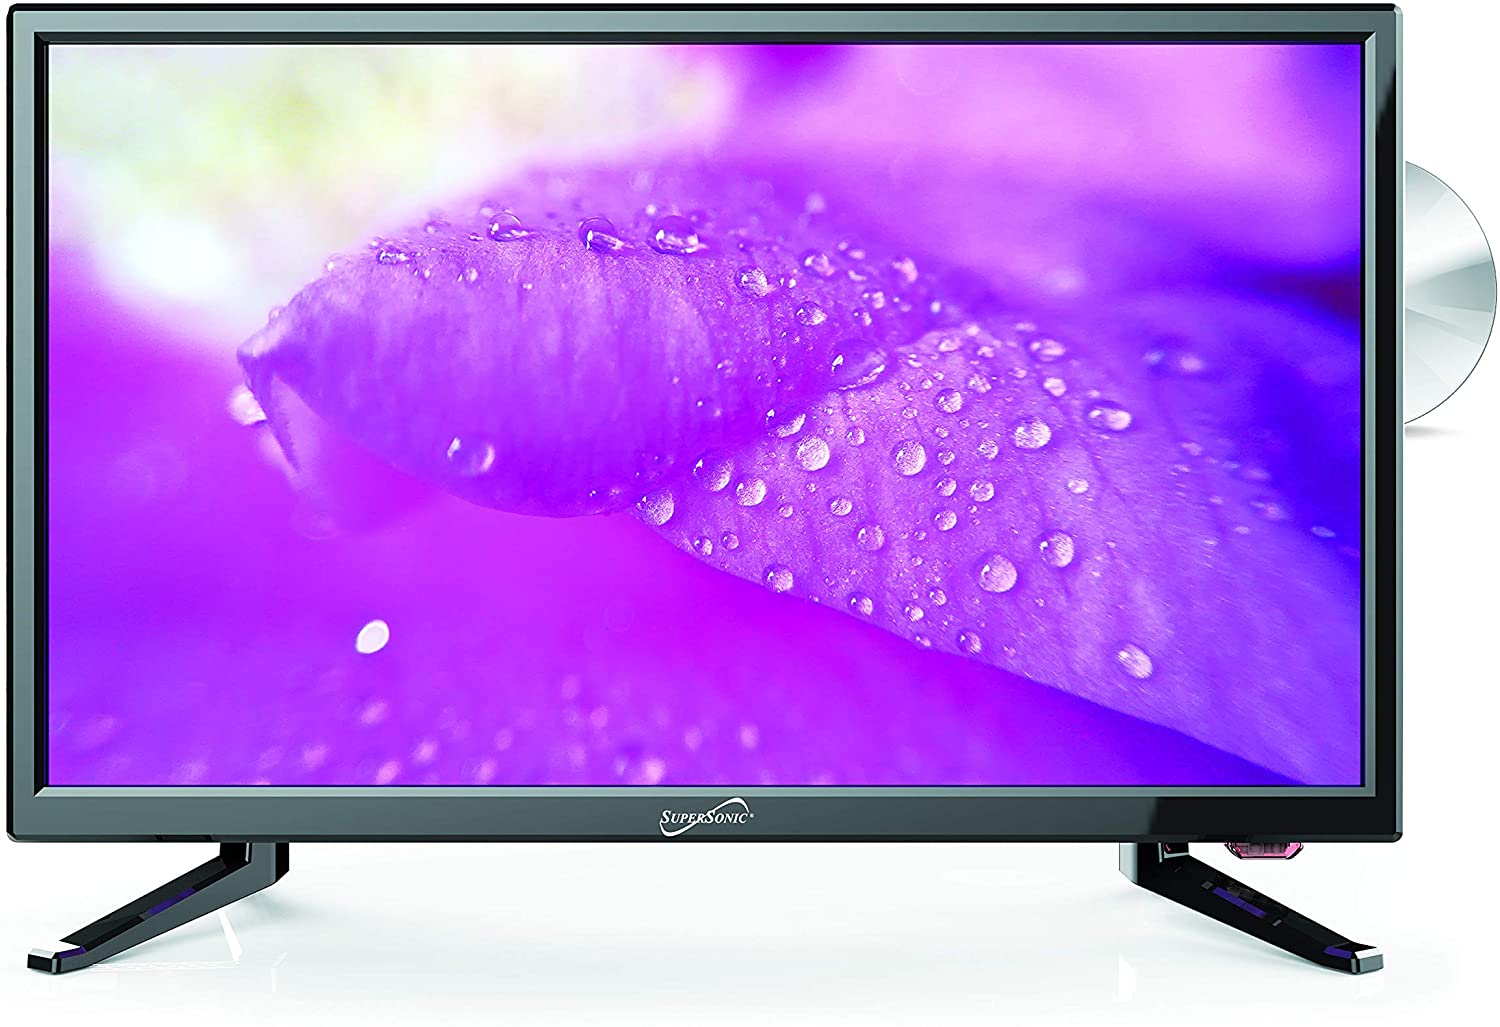 Supersonic LED Widescreen HDTV